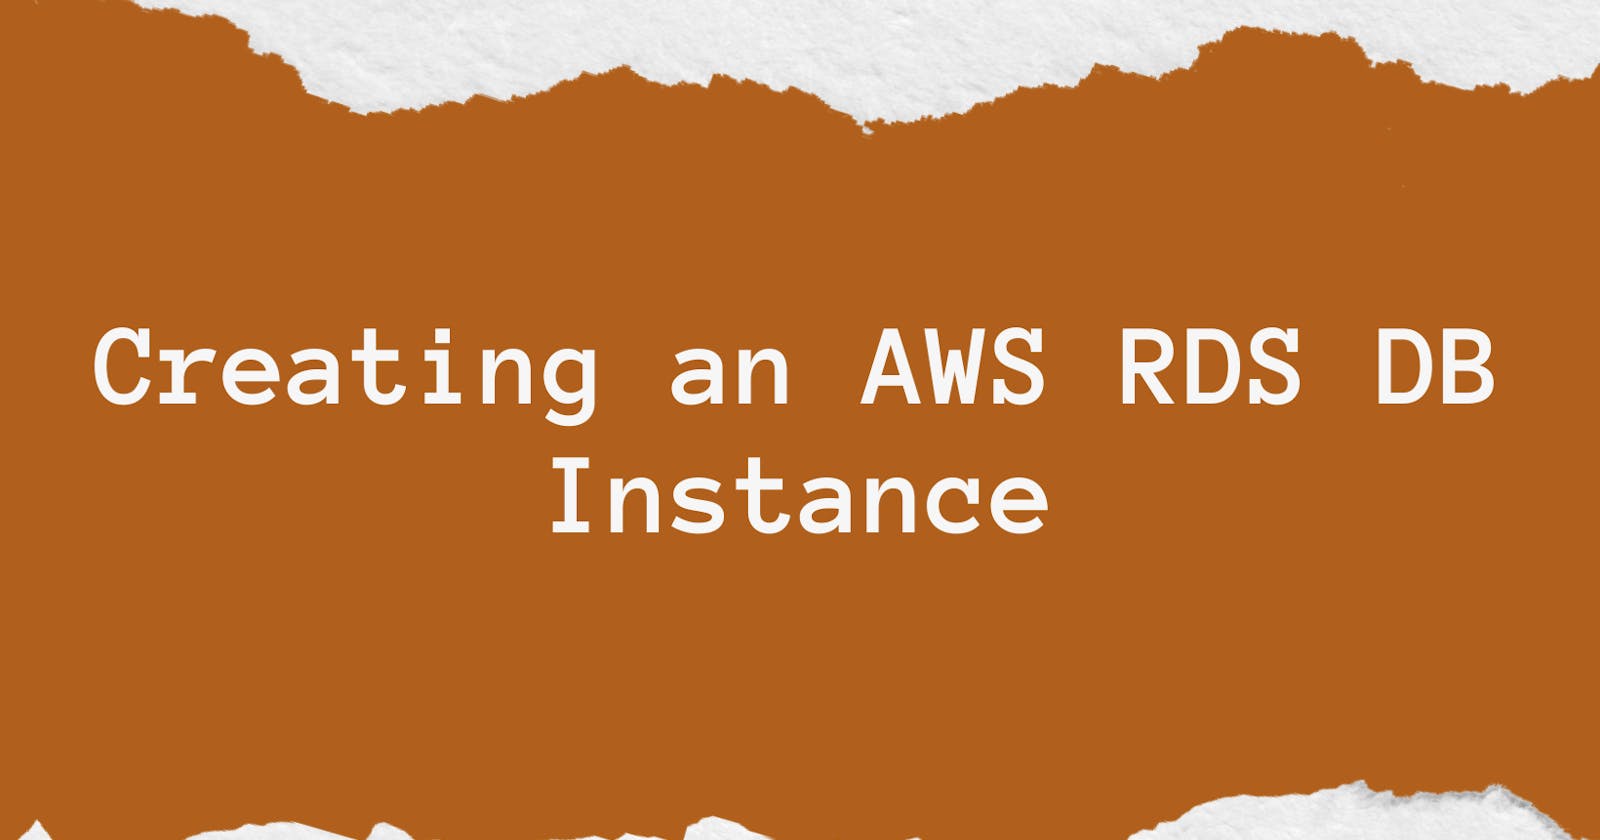 Master AWS RDS: The Ultimate Guide to Launching Your Own Cloud Database in Minutes